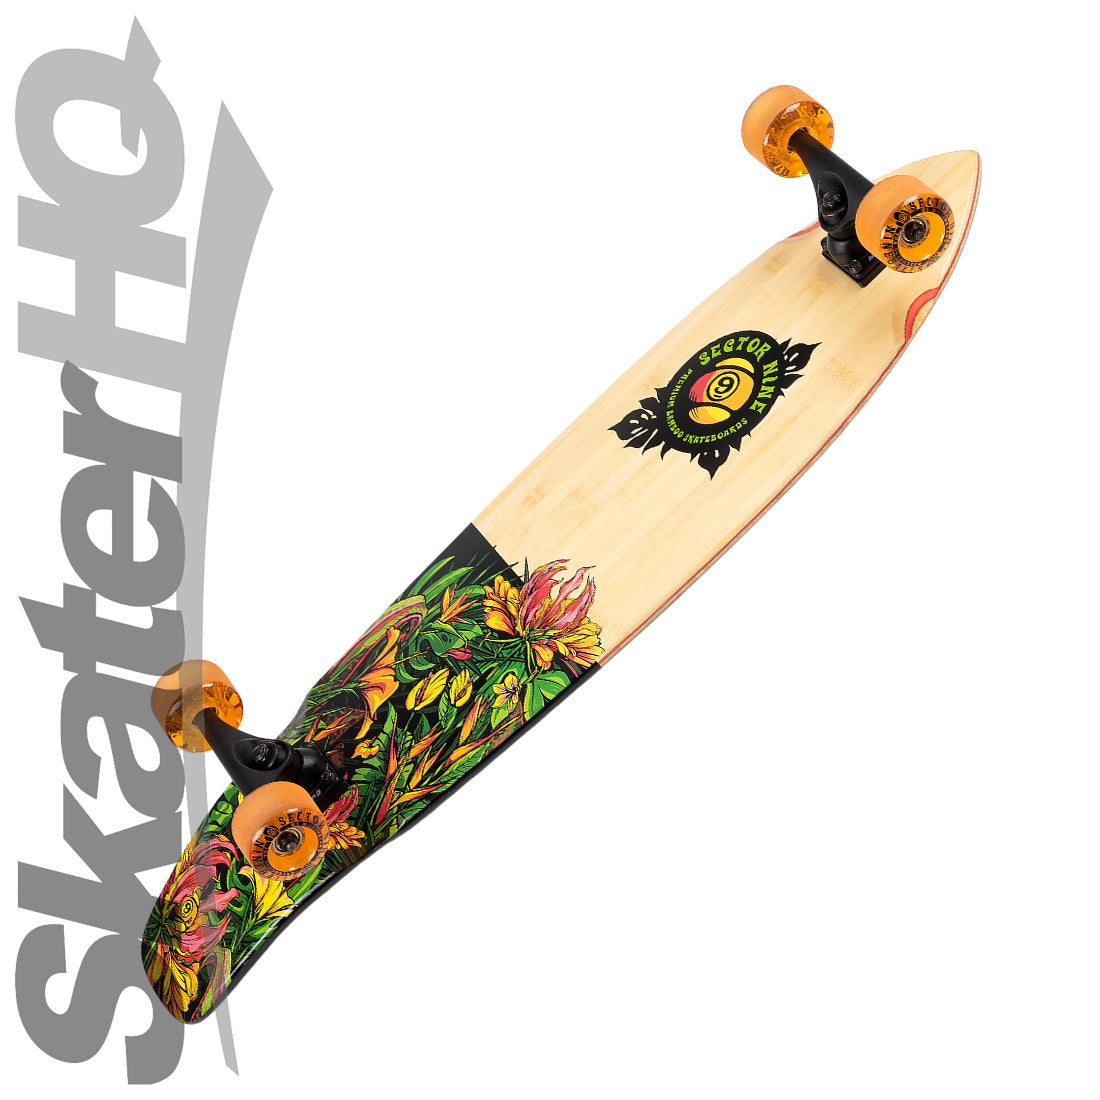 Sector 9 Fort Point Eden 34 Complete - Bamboo Skateboard Completes Longboards